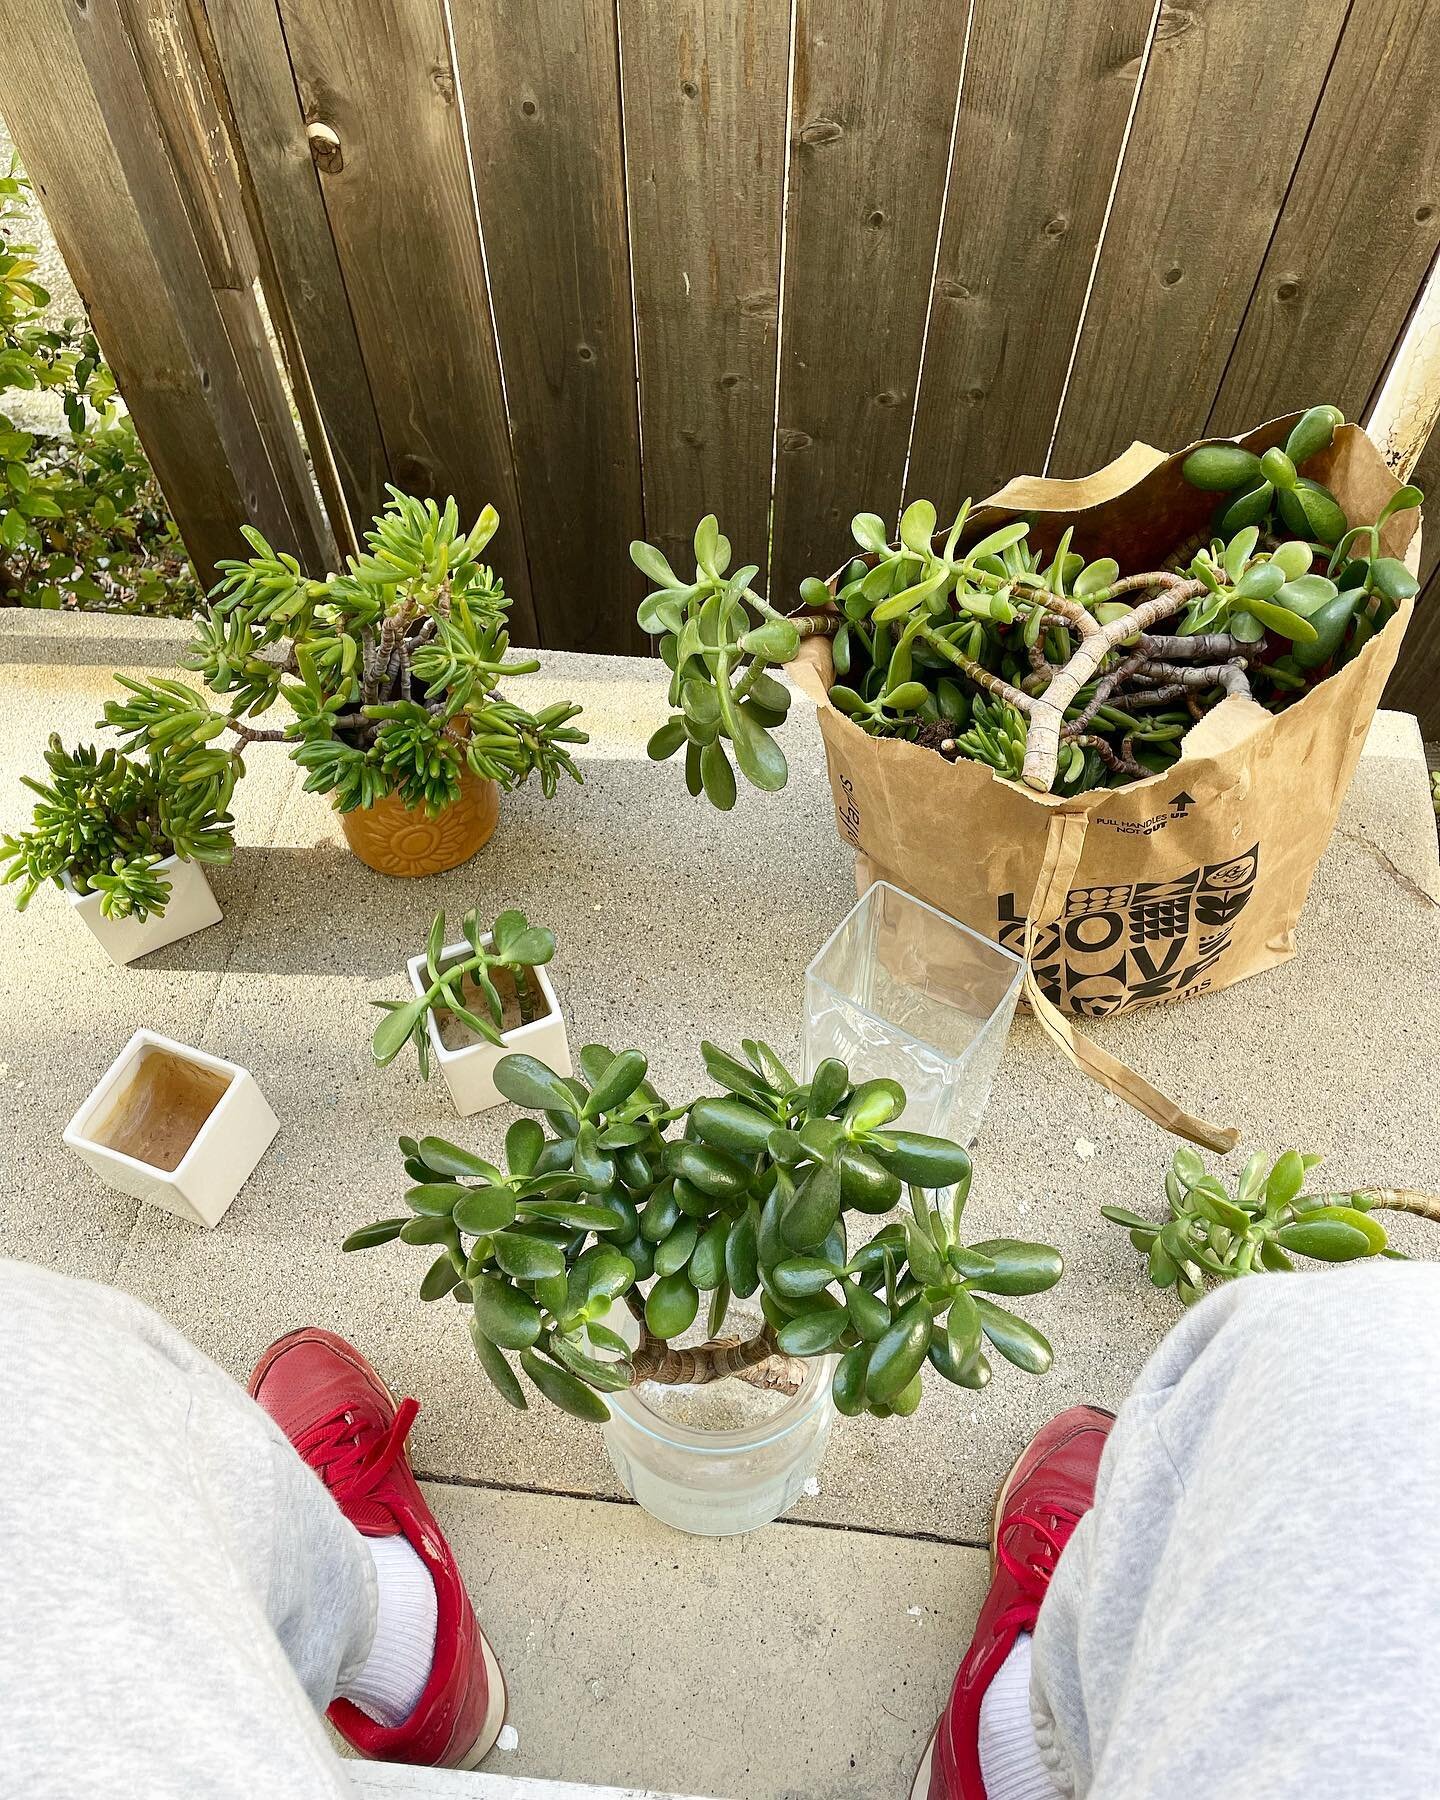 birdi&rsquo;s view ☀️
impromptu plant arrangements using jade (sign of luck!) gifted by a stranger on my morning walk.
matcha moment while working from home &ndash; my fav latte is still from my kitchen :)
homemade reminders to keep me grounded &amp;